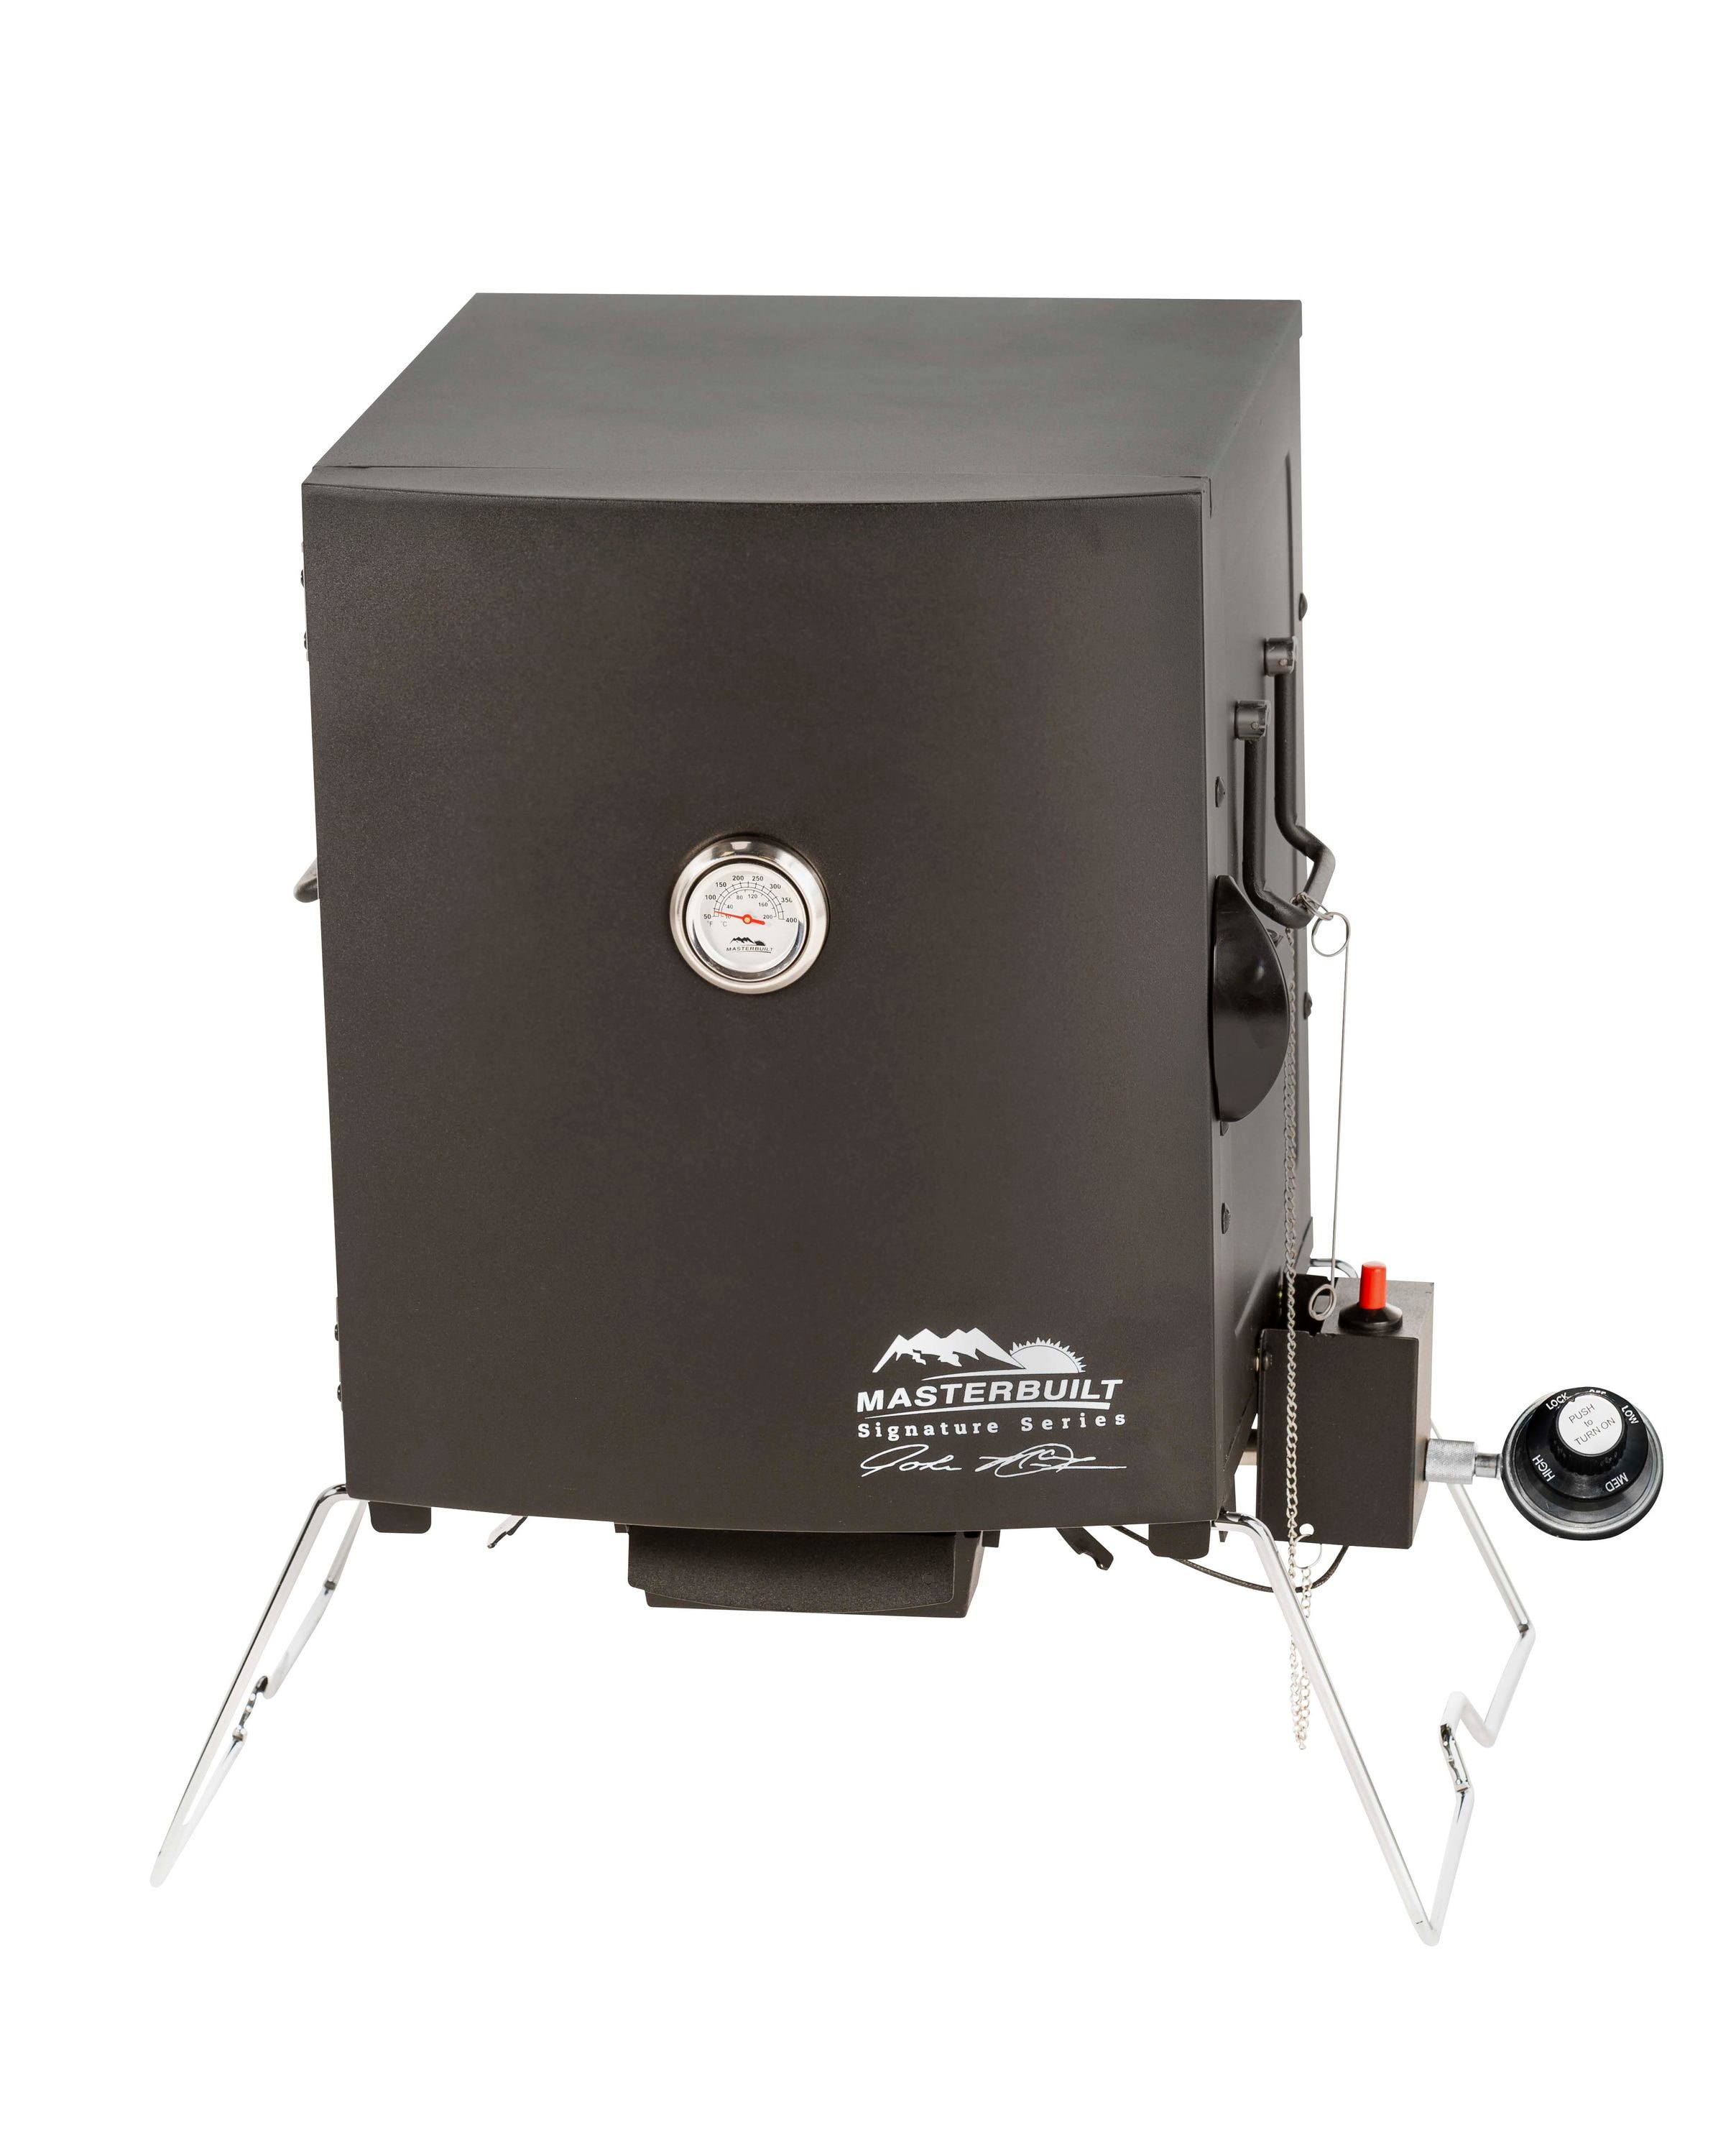 Masterbuilt MB20315722 Pro Series Dual Fuel Propane and Charcoal Smoker in Black Plus Cover Bundle